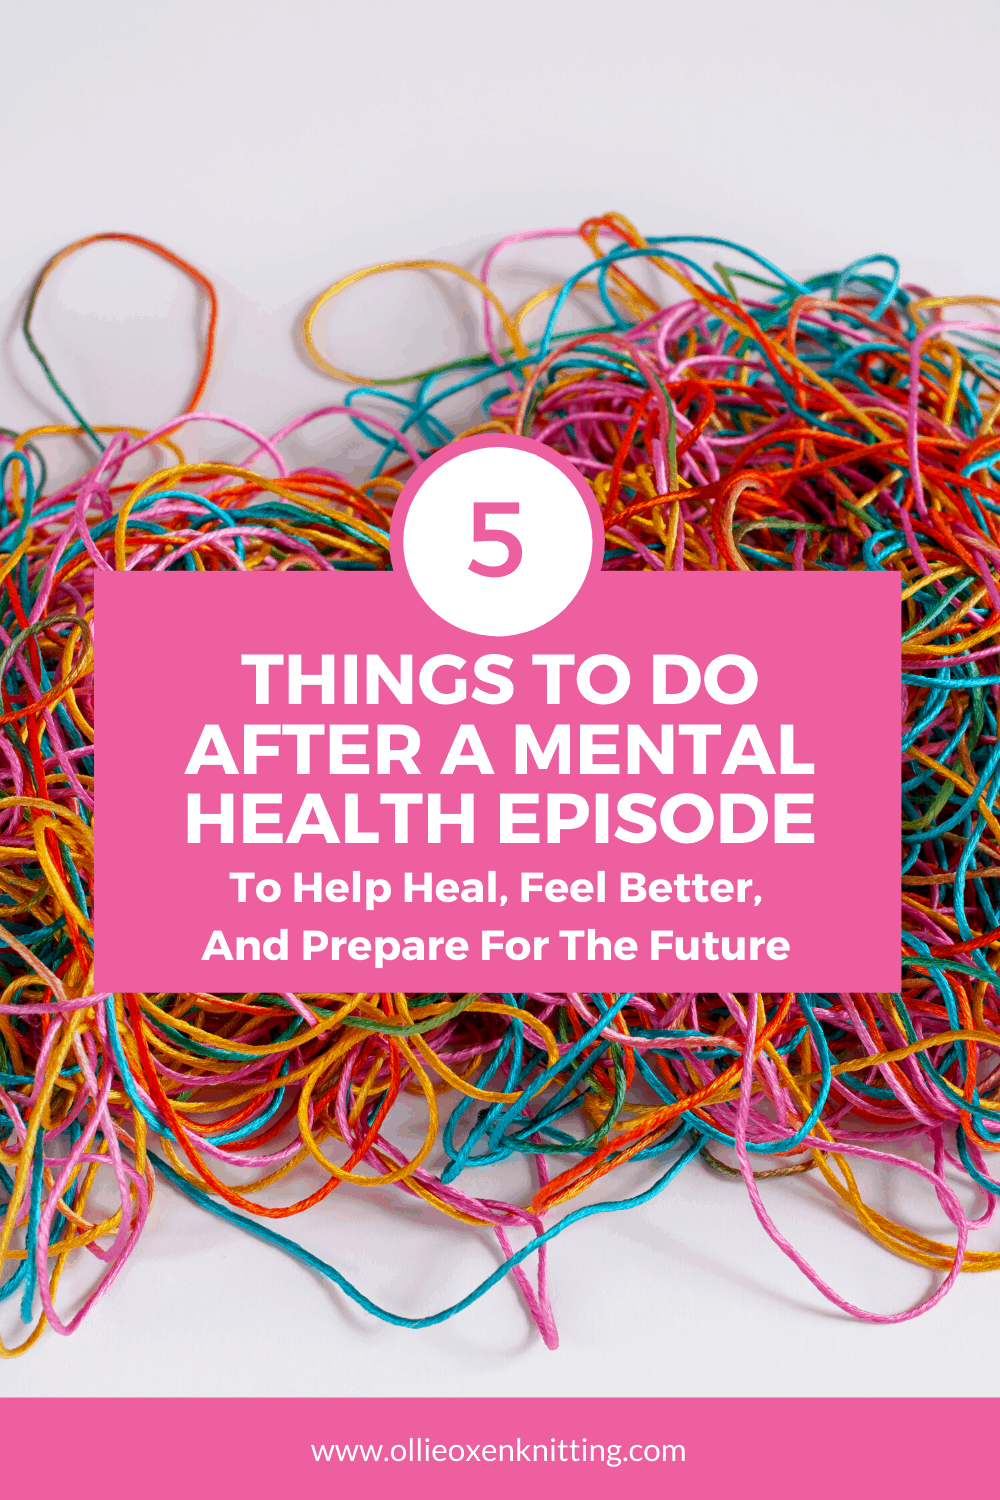 5 Things To Do After A Mental Health Episode To Help Heal, Feel Better, And Prepare For The Future | Ollie Oxen Knitting